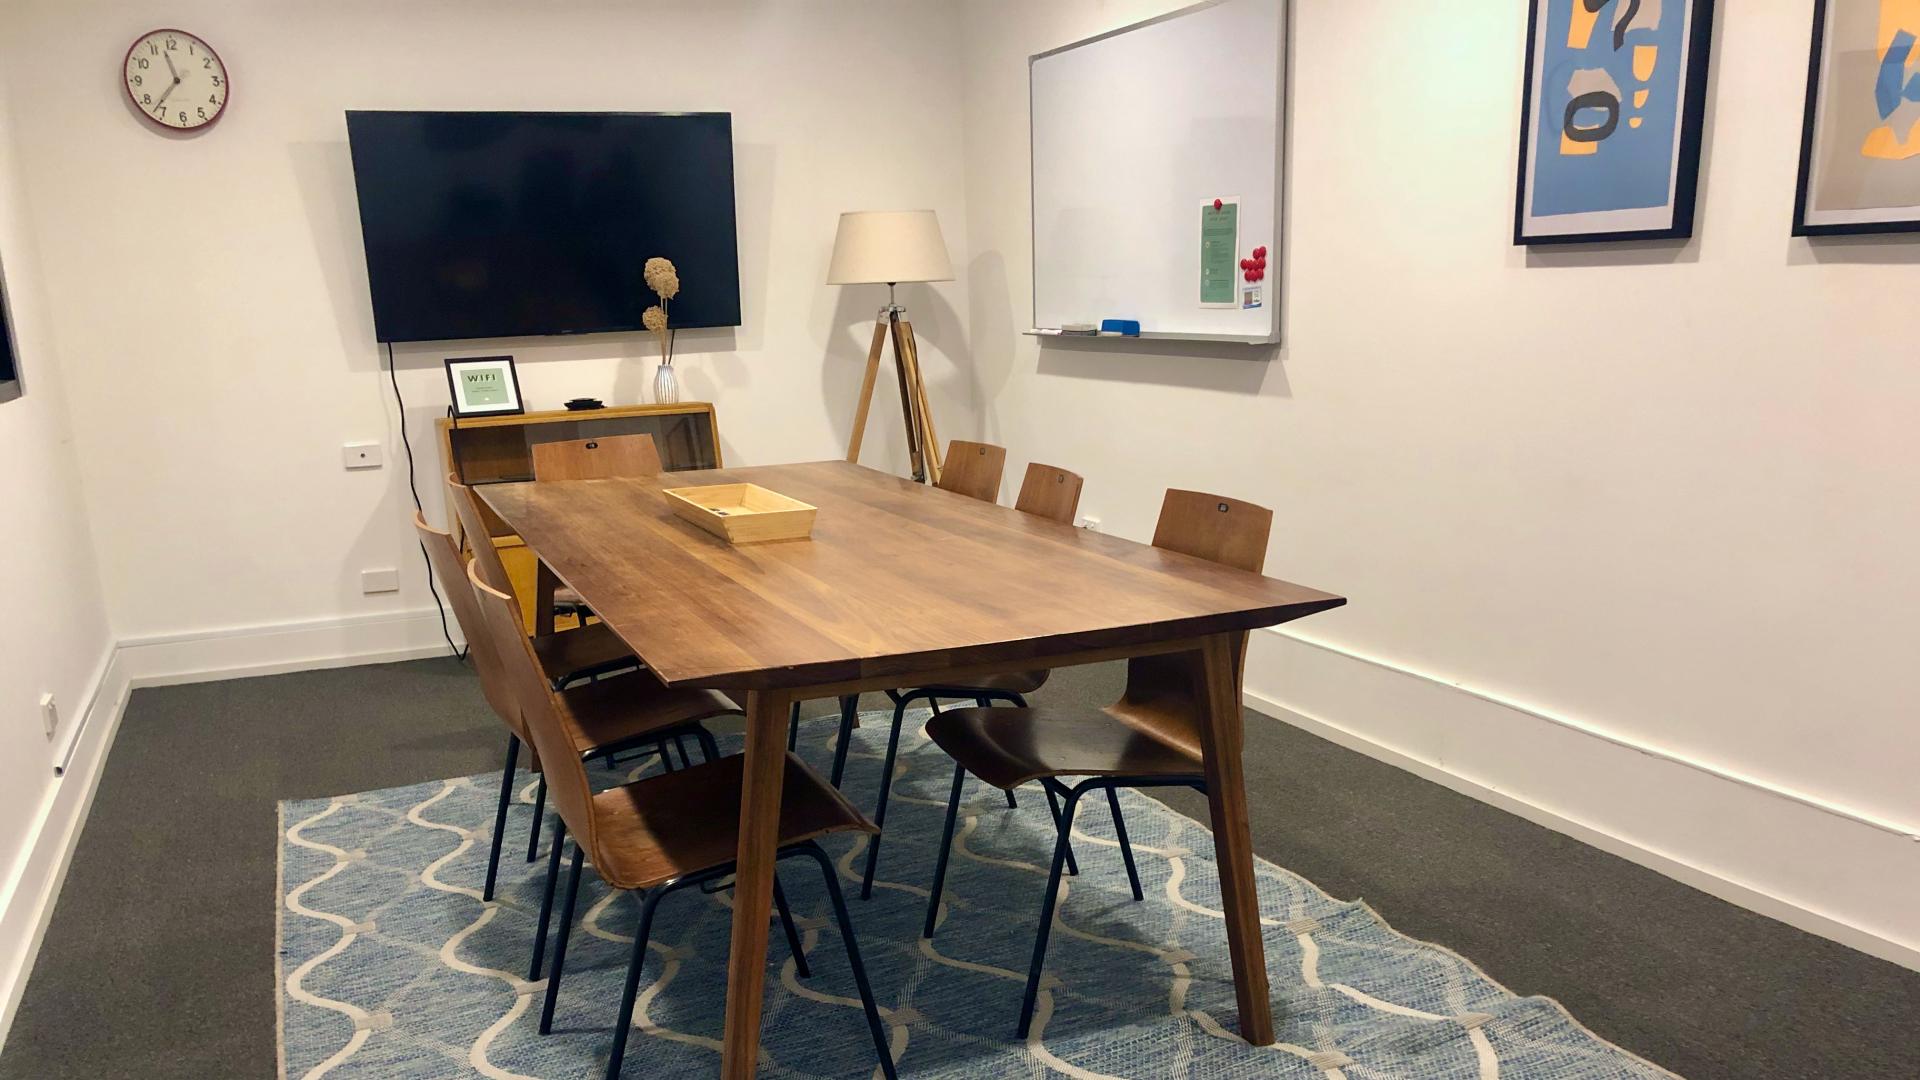 Meeting Rooms for Hire in Brunswick